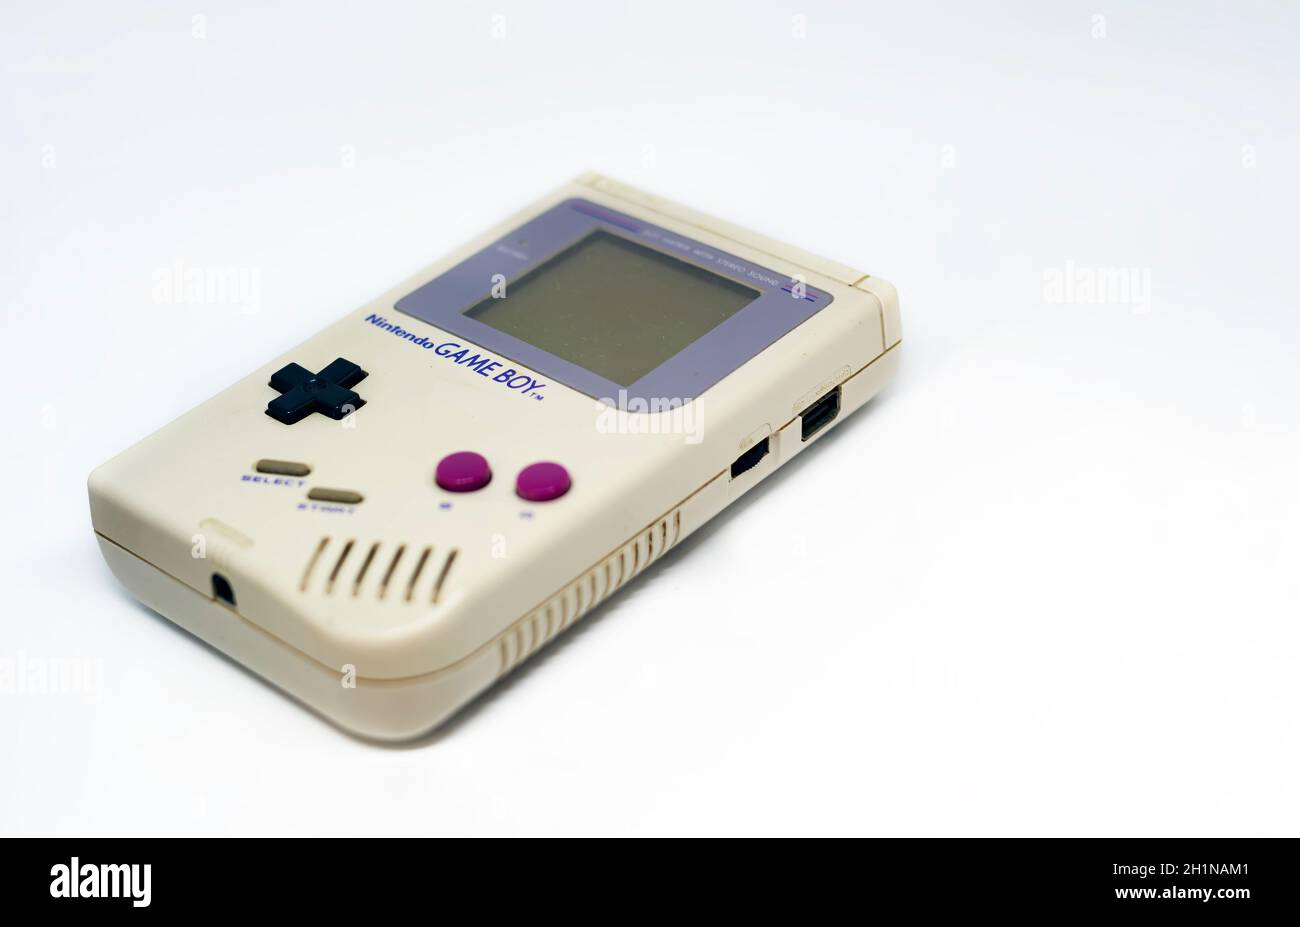 Rome, Italy, December 23, 2020: The Gameboy portable video game console from Nintendo isolated on a white background. Vintage video game console from Stock Photo